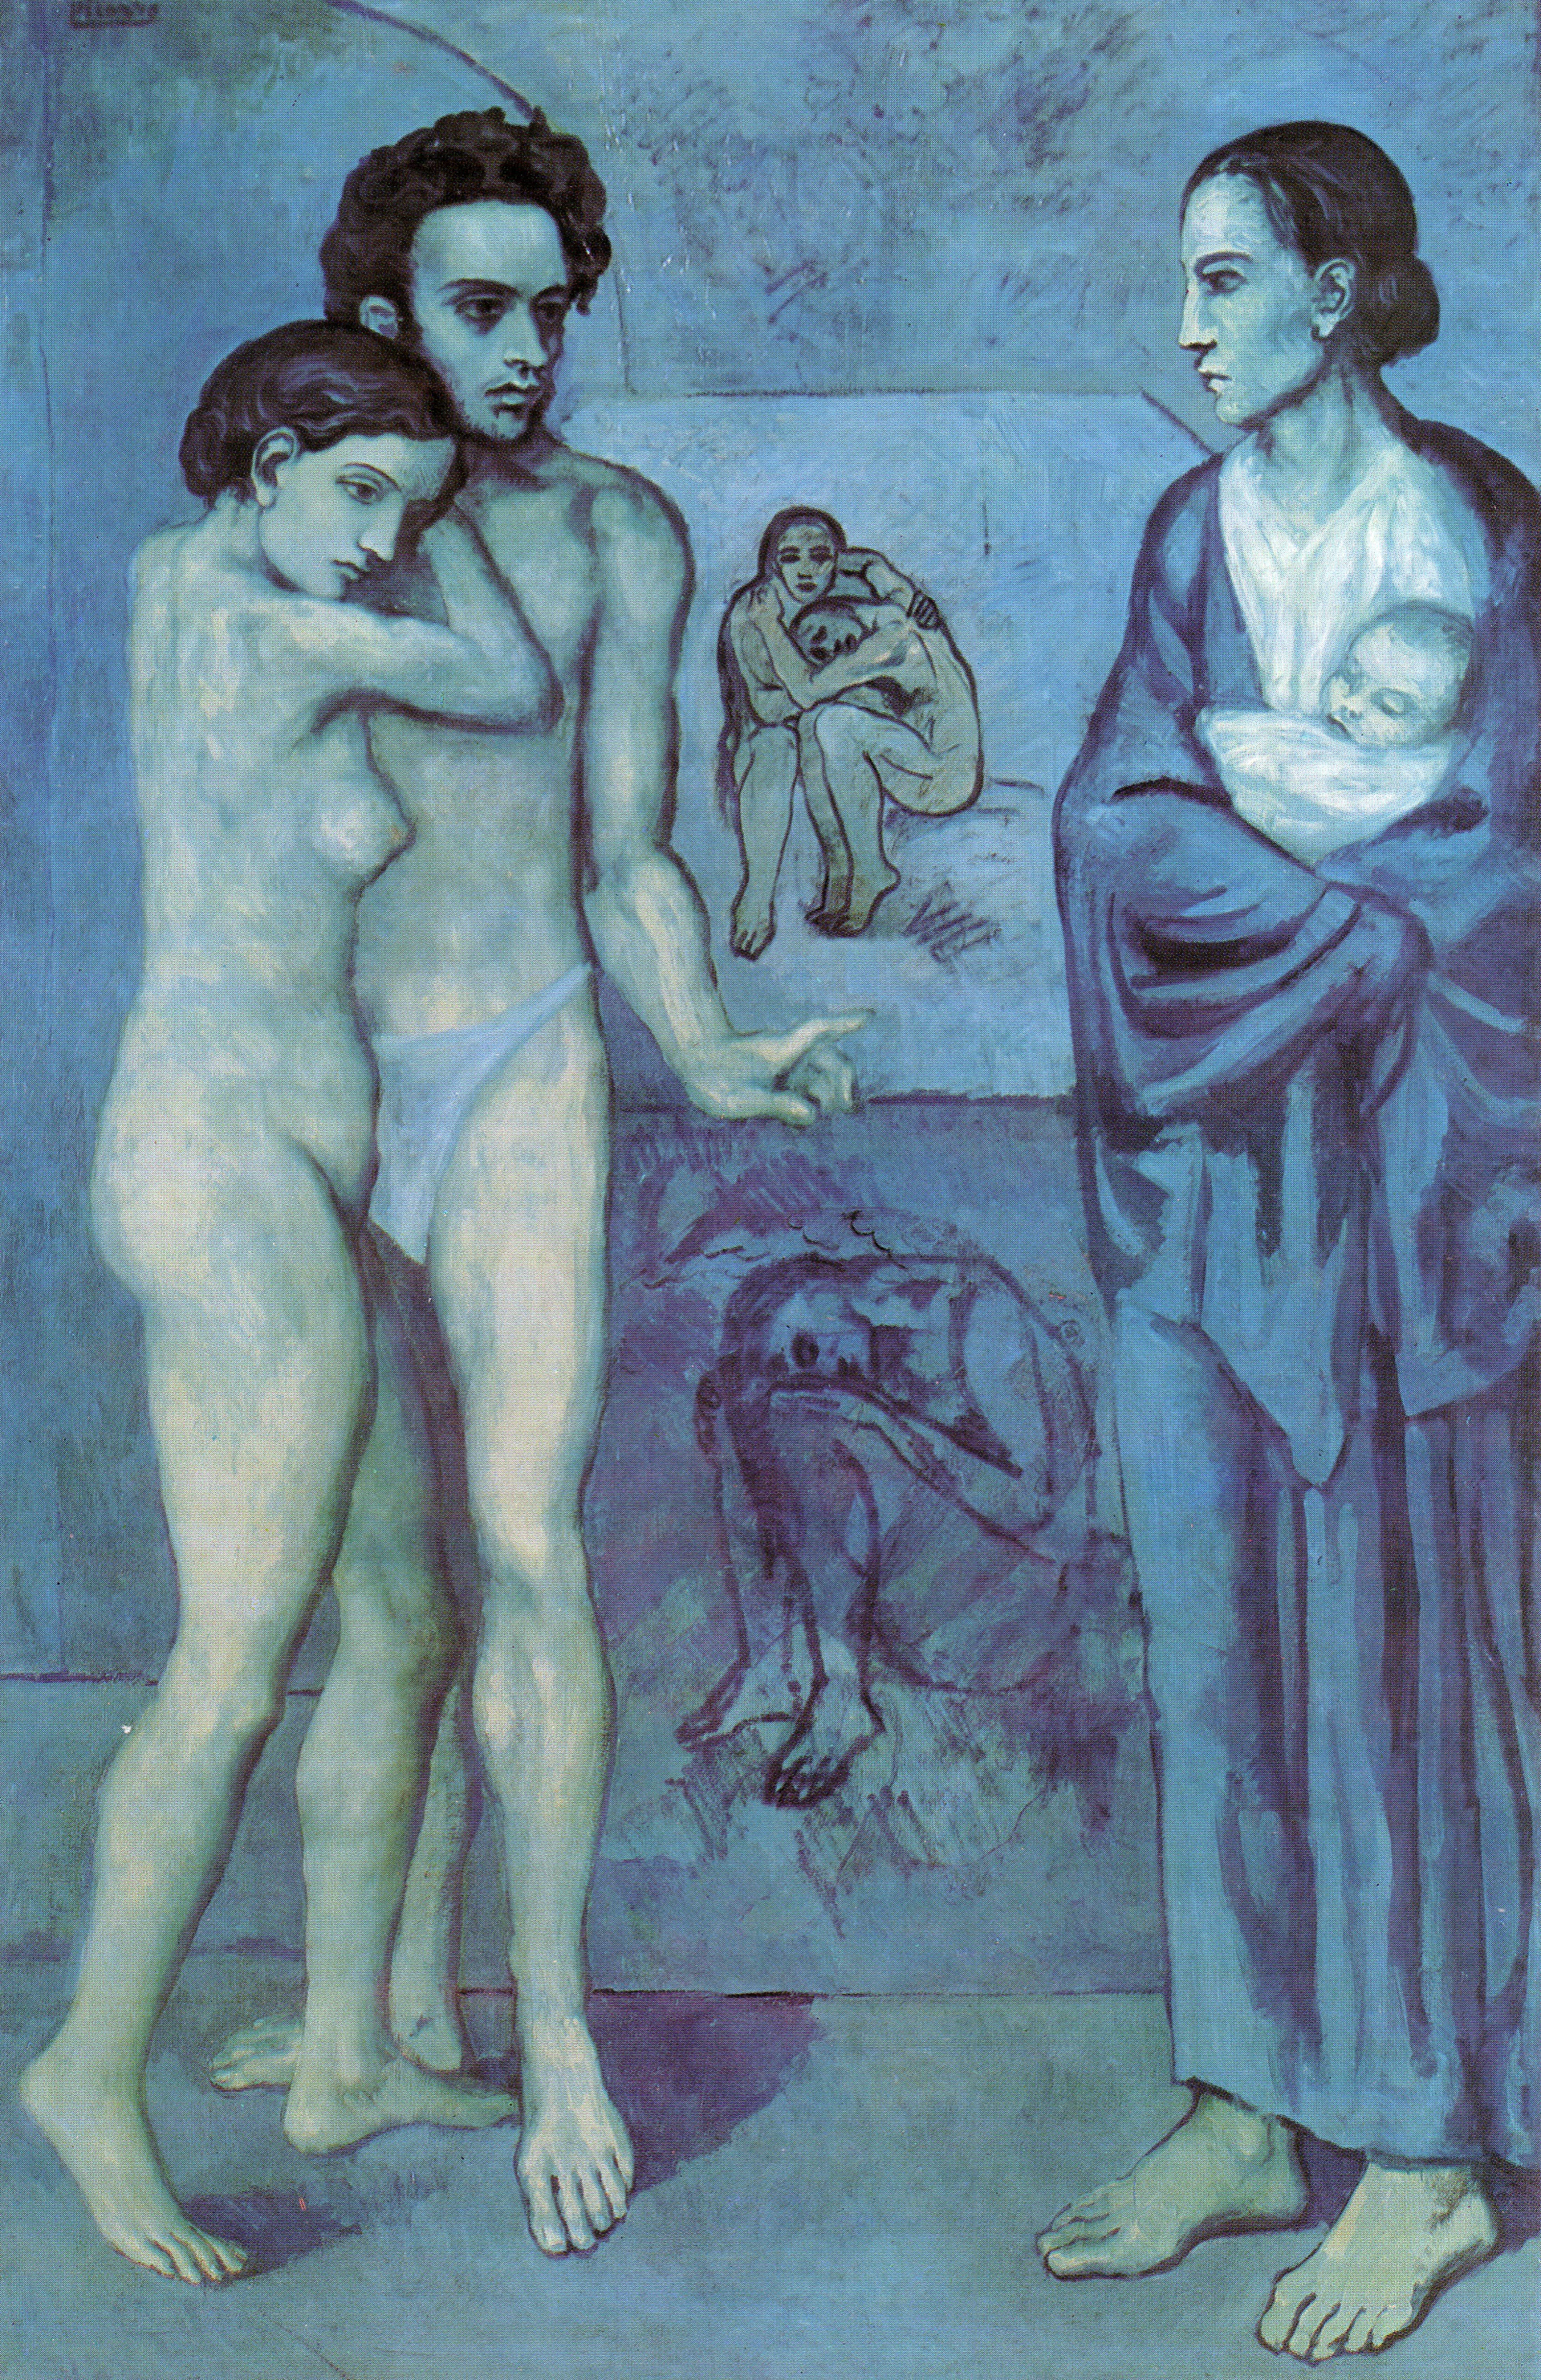 The painting portrays two pairs of people, a naked couple confronting a mother bearing a child in her arms.[4] In the background of the room, apparently a studio, there are two paintings within the painting, the upper one showing a crouching and embracing nude couple, the lower one showing a lonesome crouching nude person very similar to Sorrow by Vincent van Gogh.